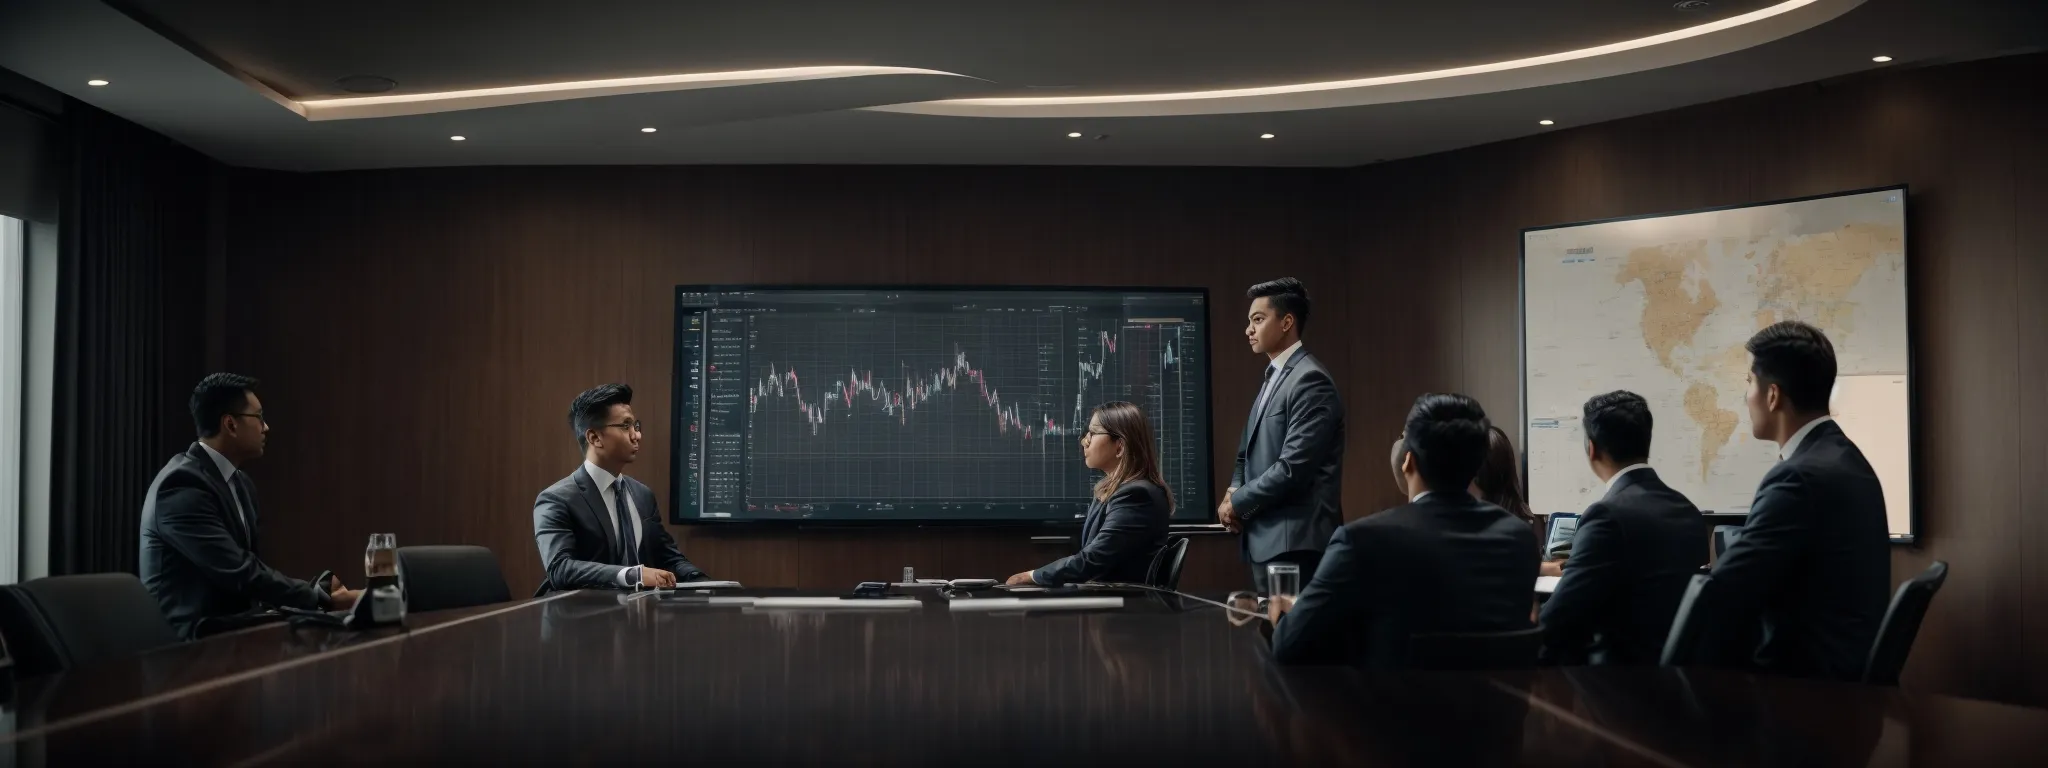 an executive team studies a graph highlighting different pricing strategies projected on a screen in a modern conference room.